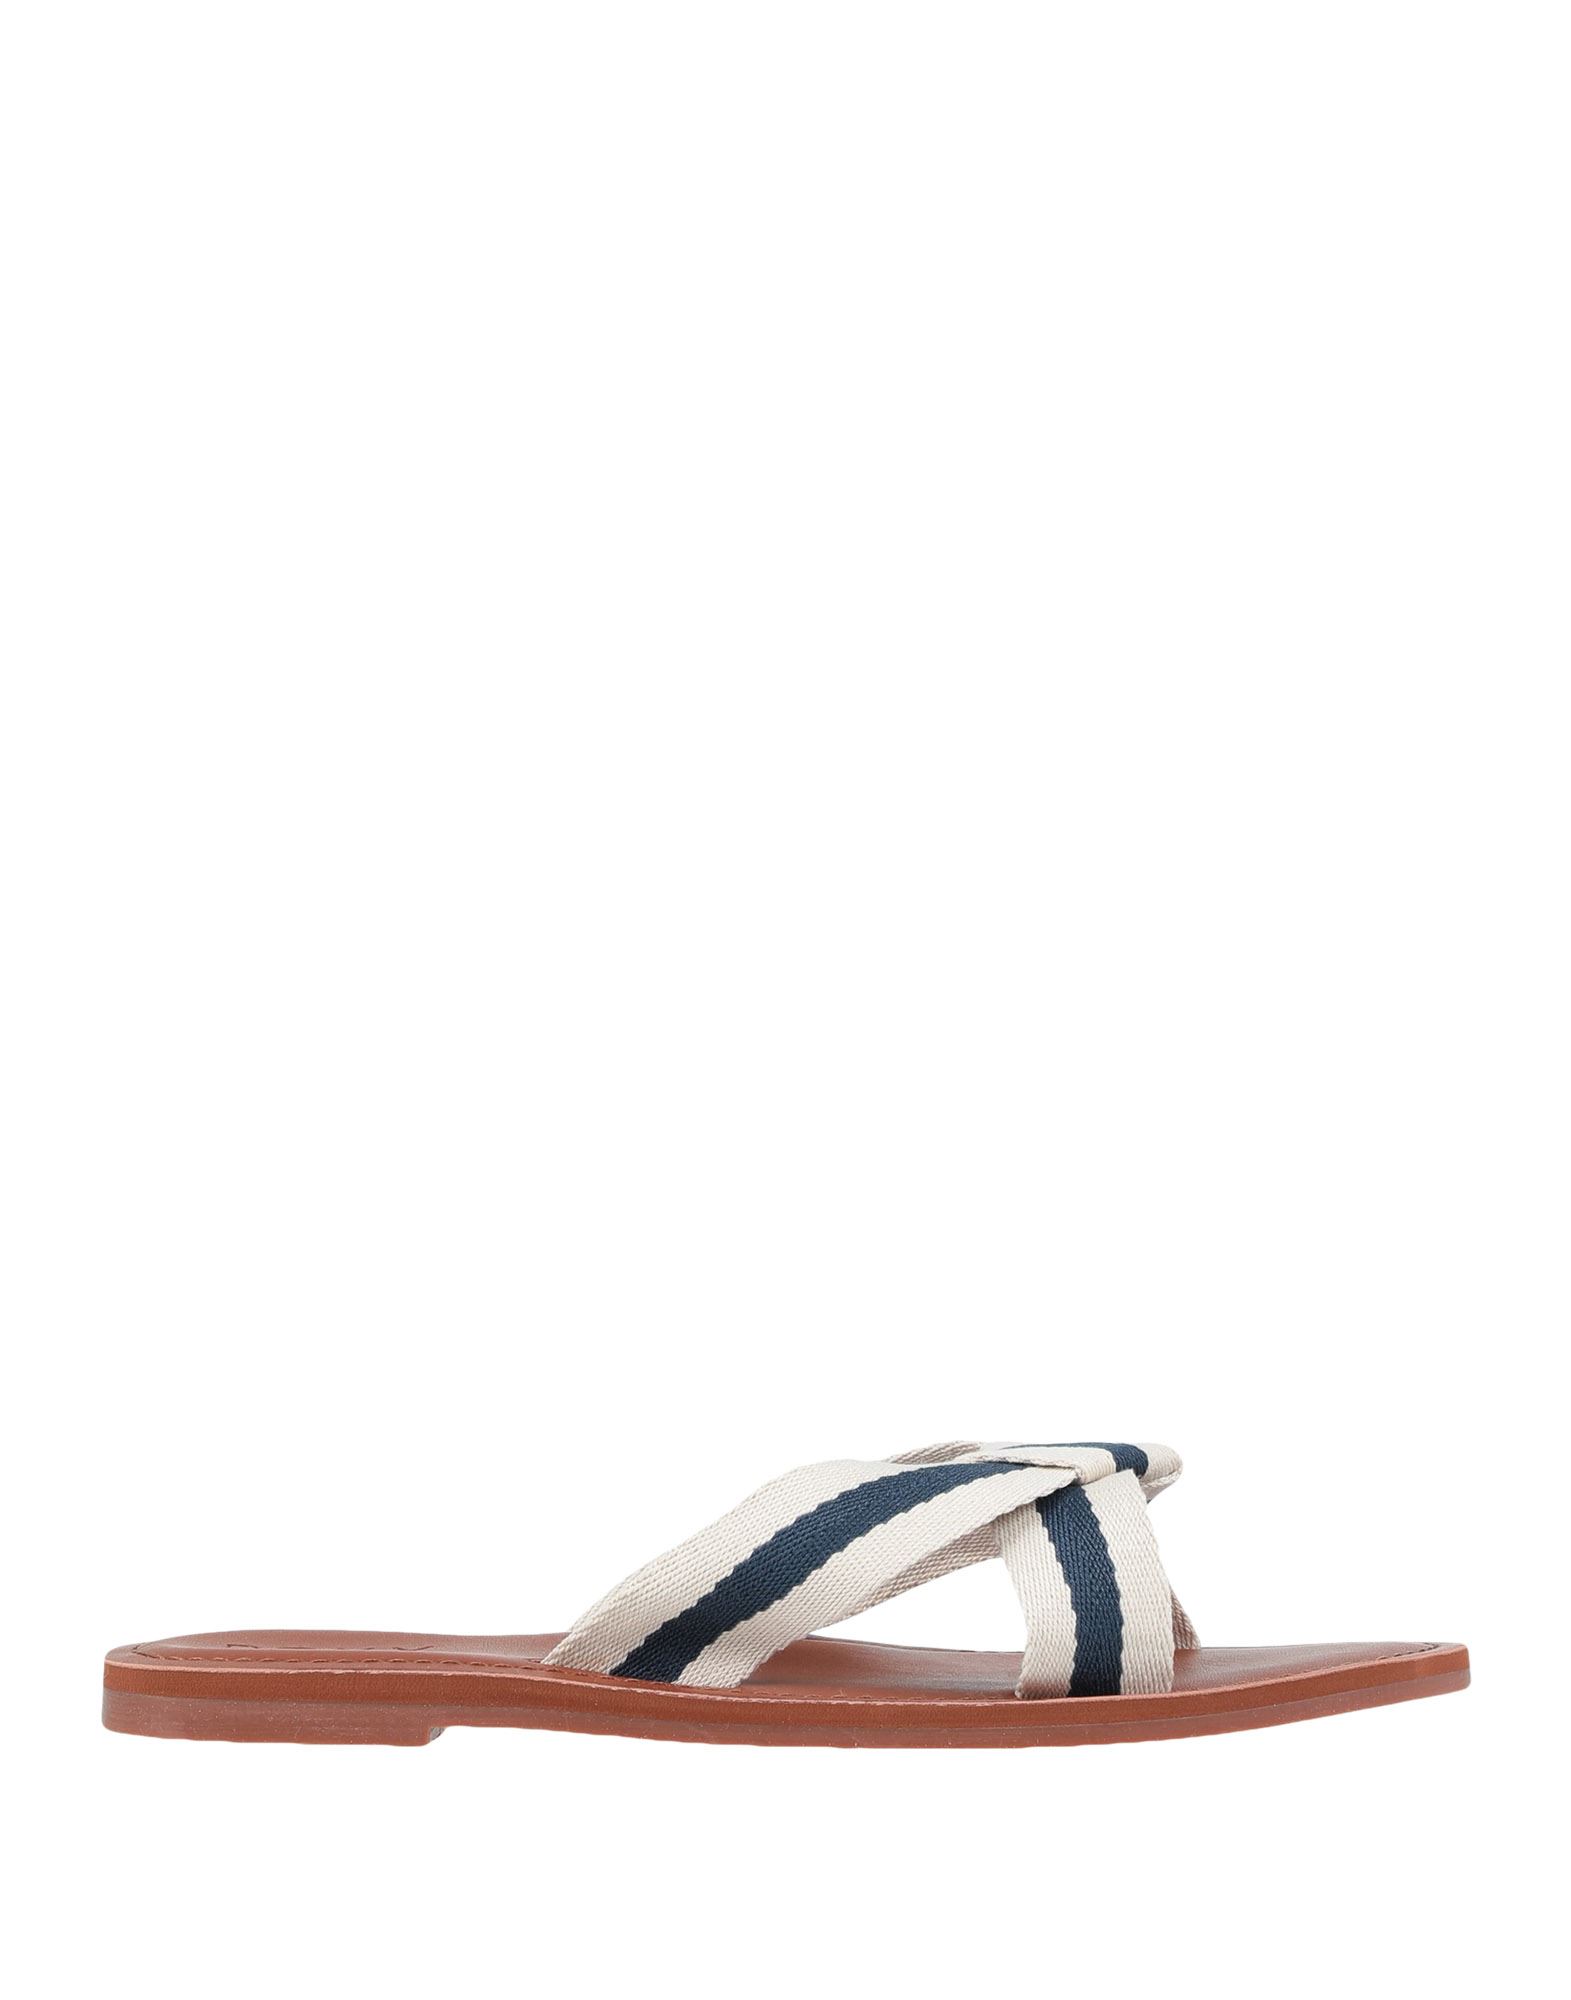 Roxy Rosarito Sandal in Black Womens Shoes Flats and flat shoes Sandals and flip-flops 